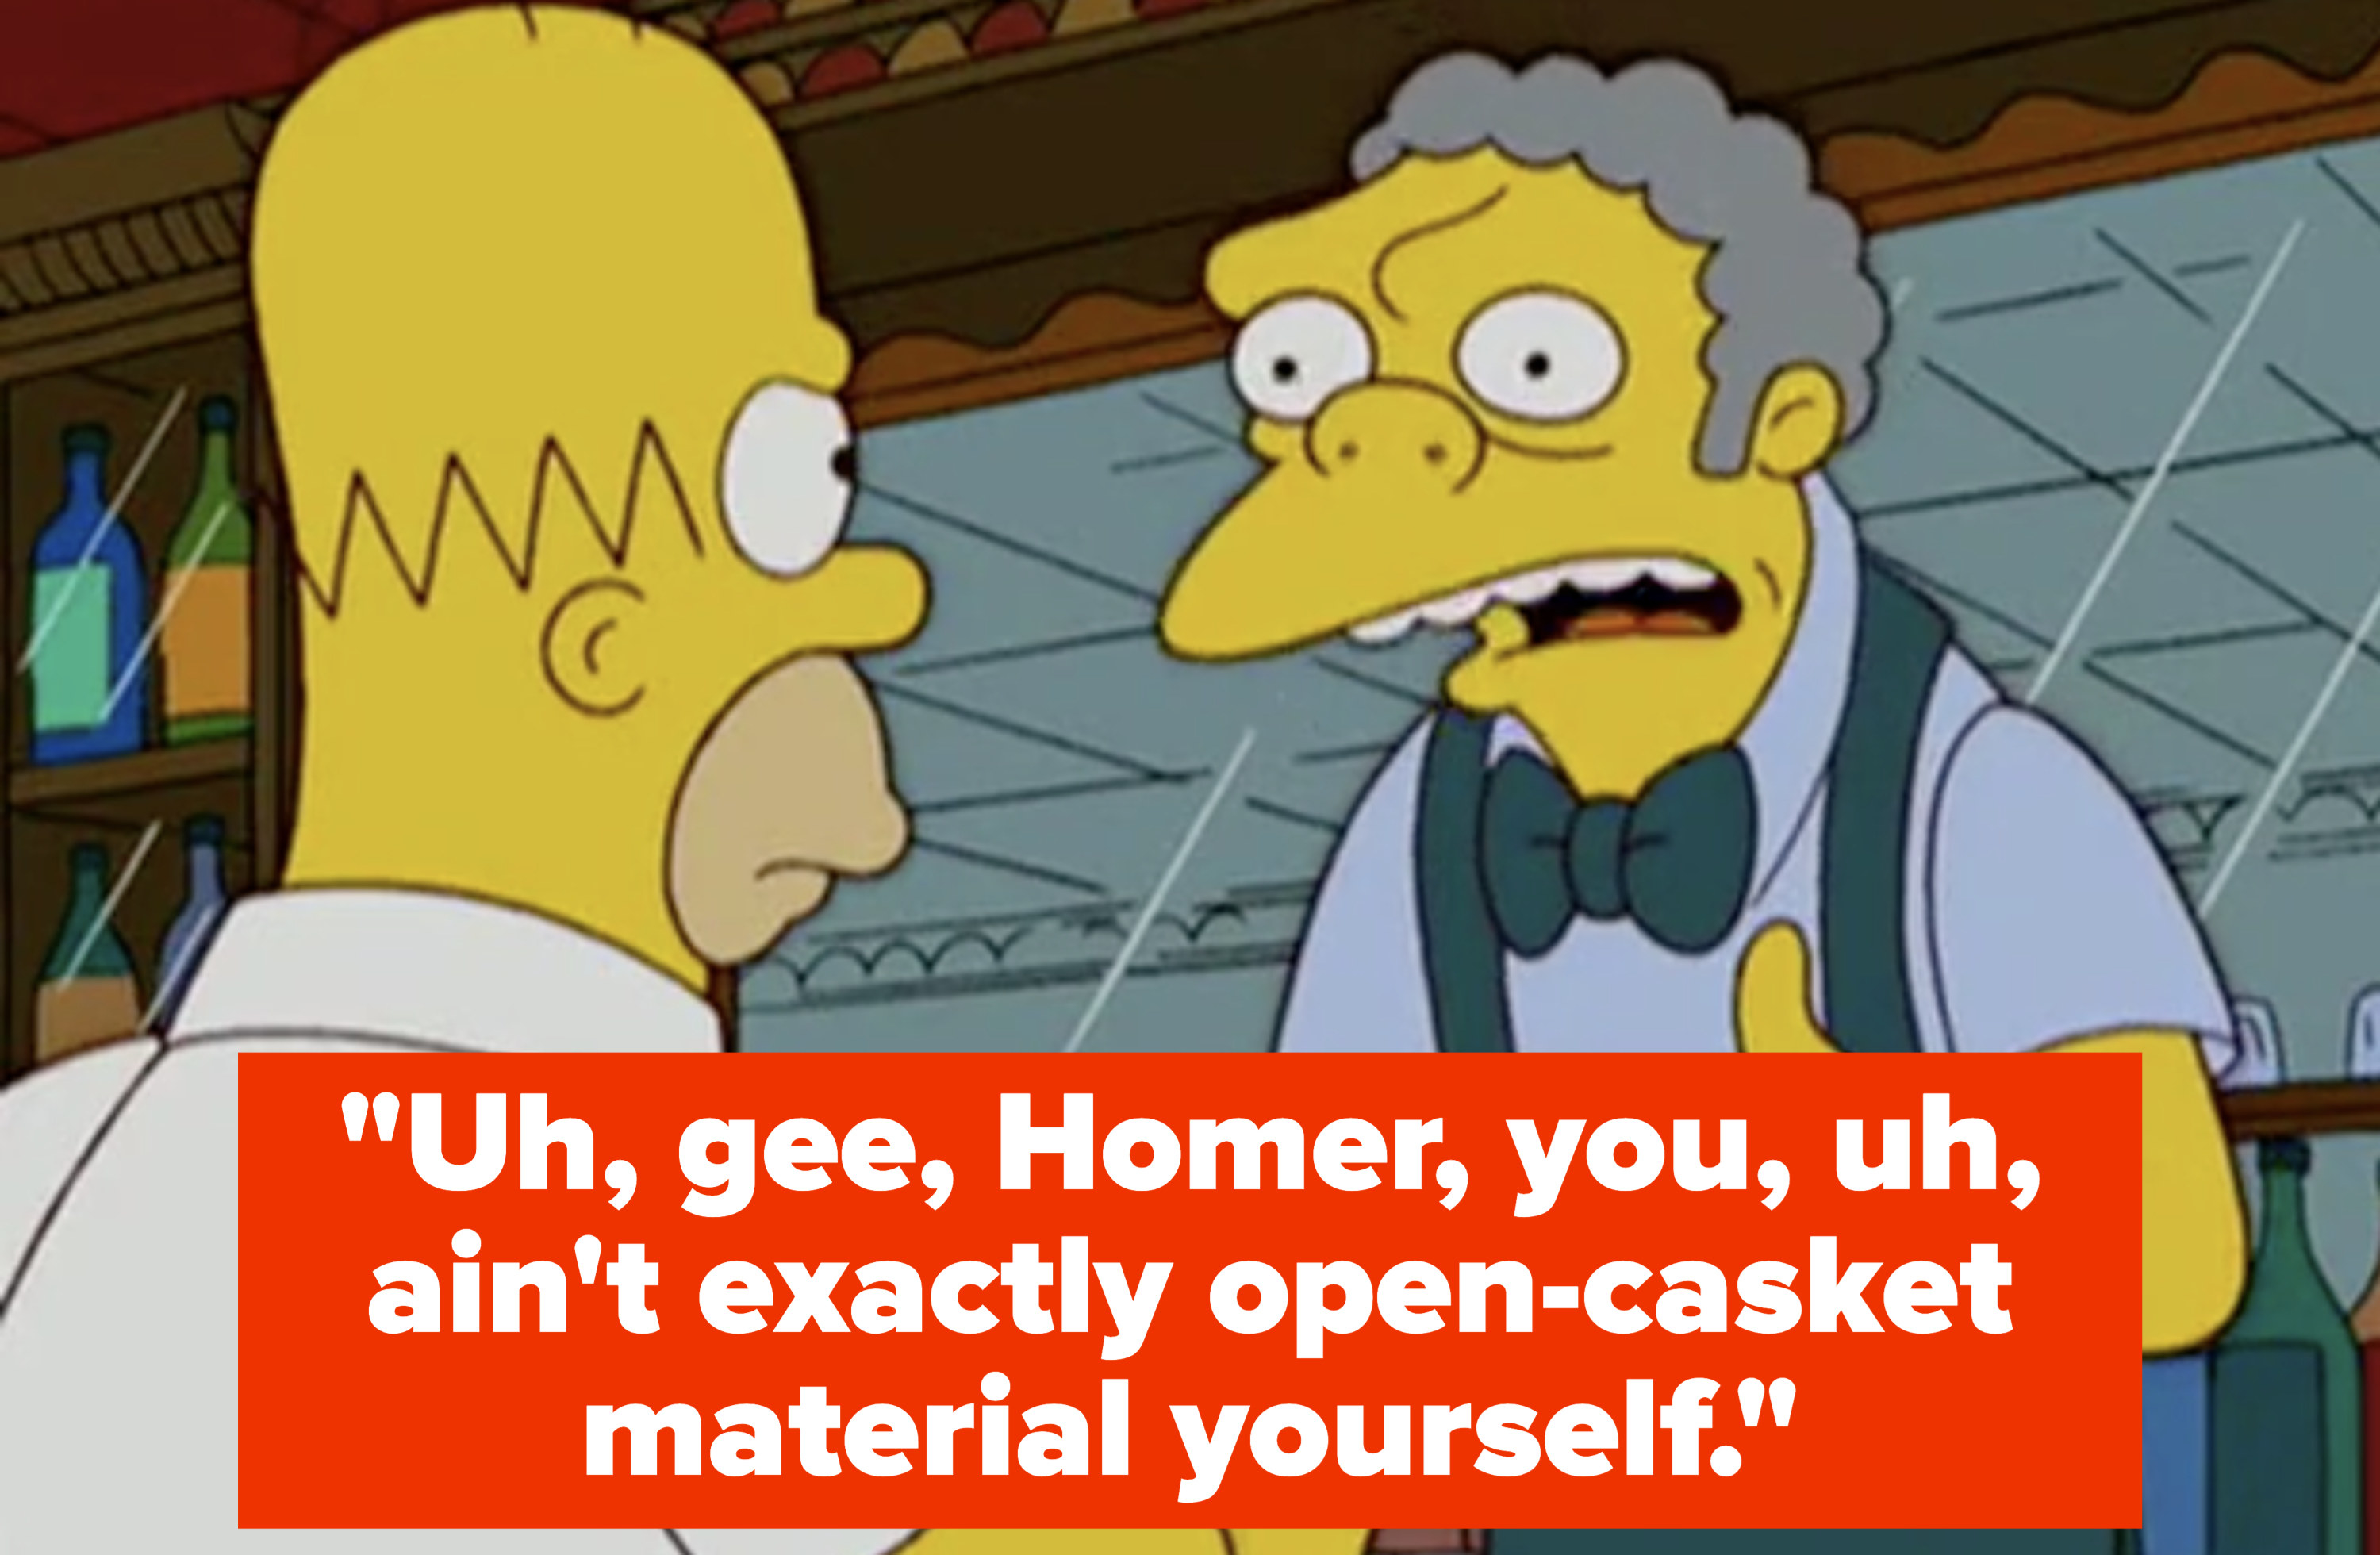 &quot;Uh, gee, Homer, you, uh, ain&#x27;t exactly open-casket material yourself&quot;